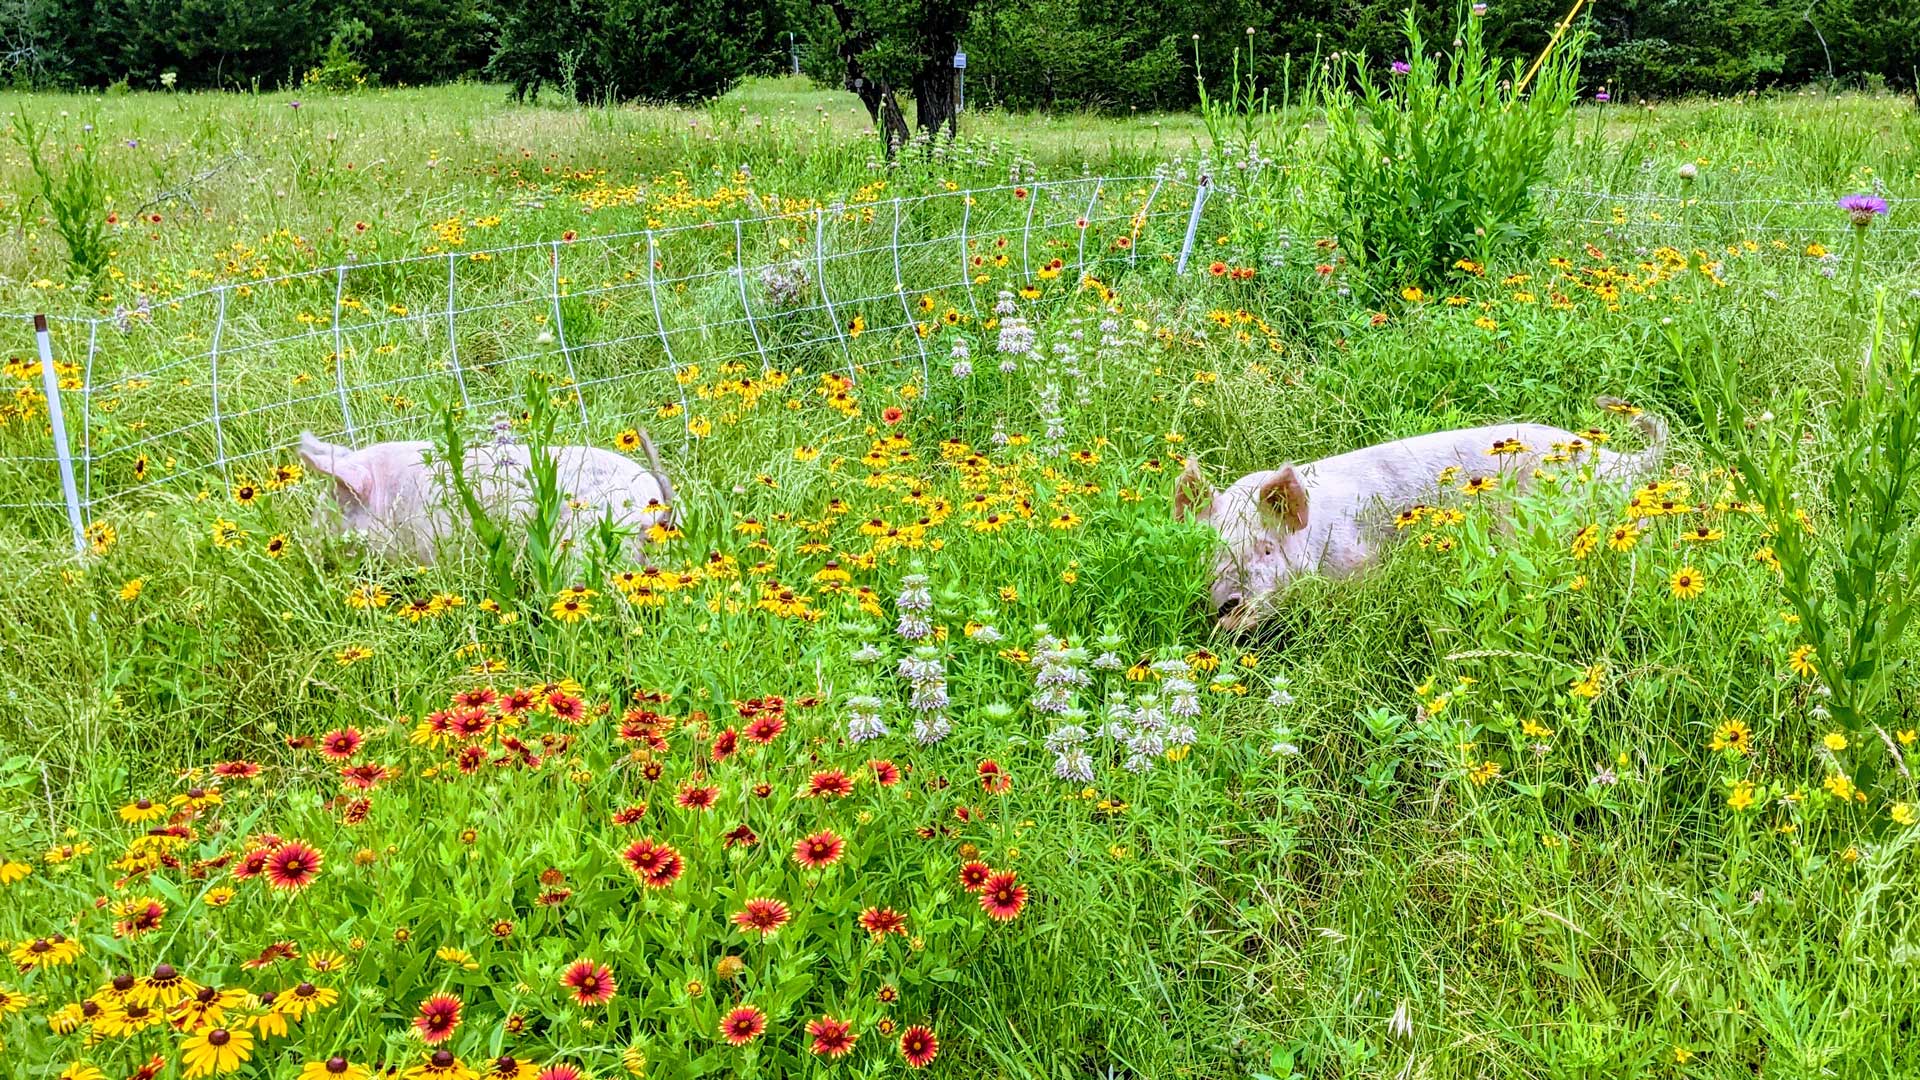 pigs grazing in a meadow of texas native wildflowers